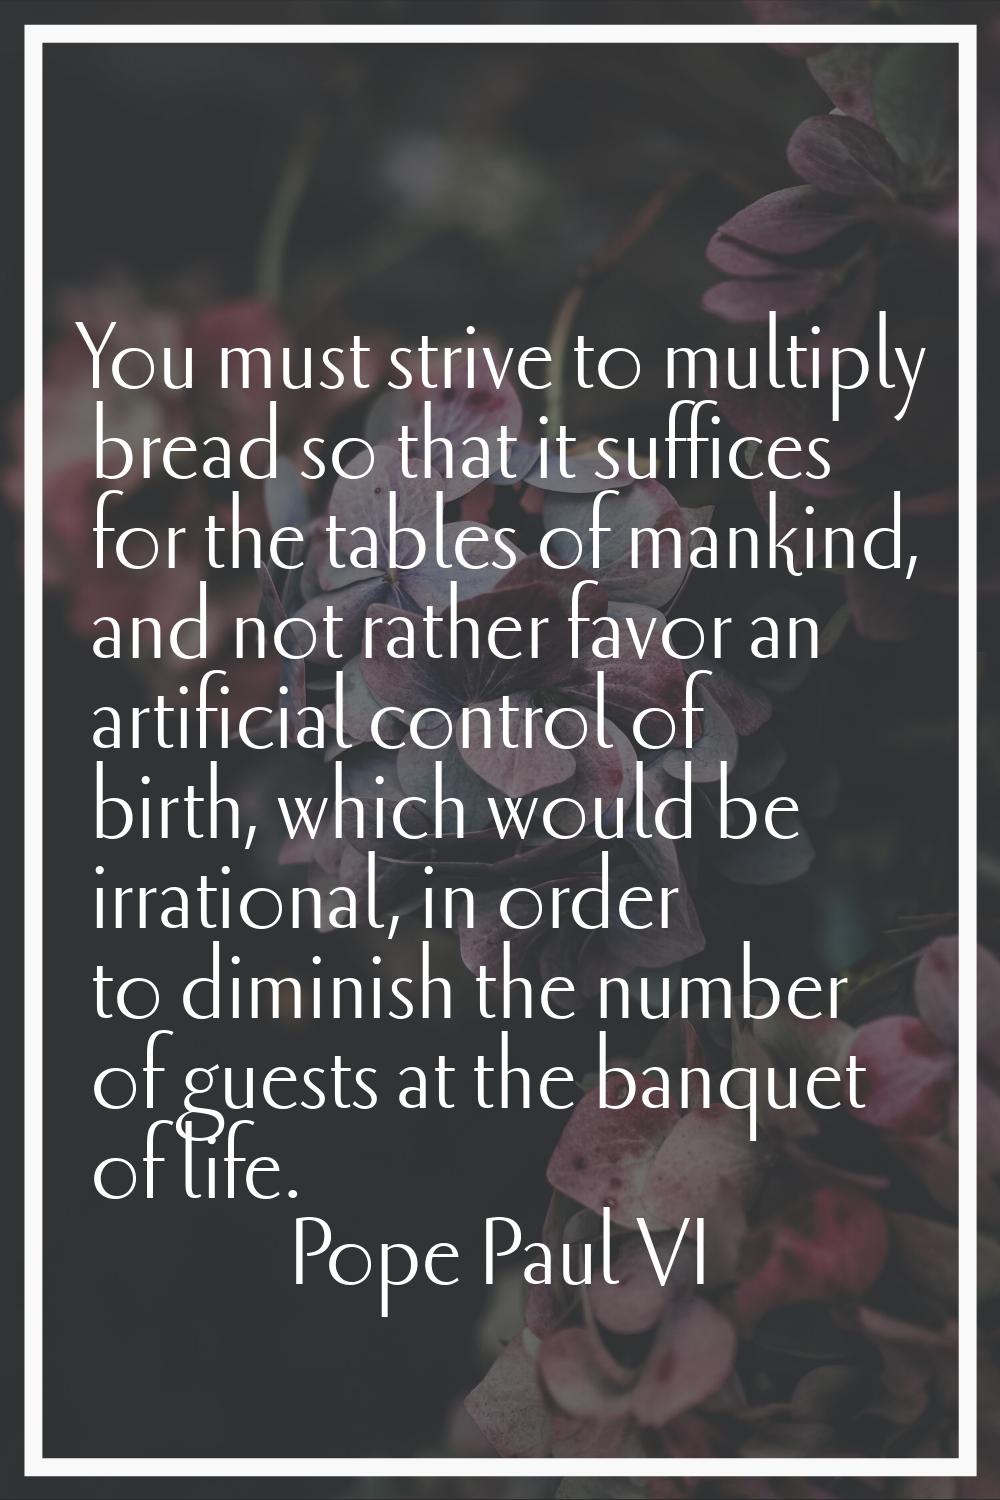 You must strive to multiply bread so that it suffices for the tables of mankind, and not rather fav